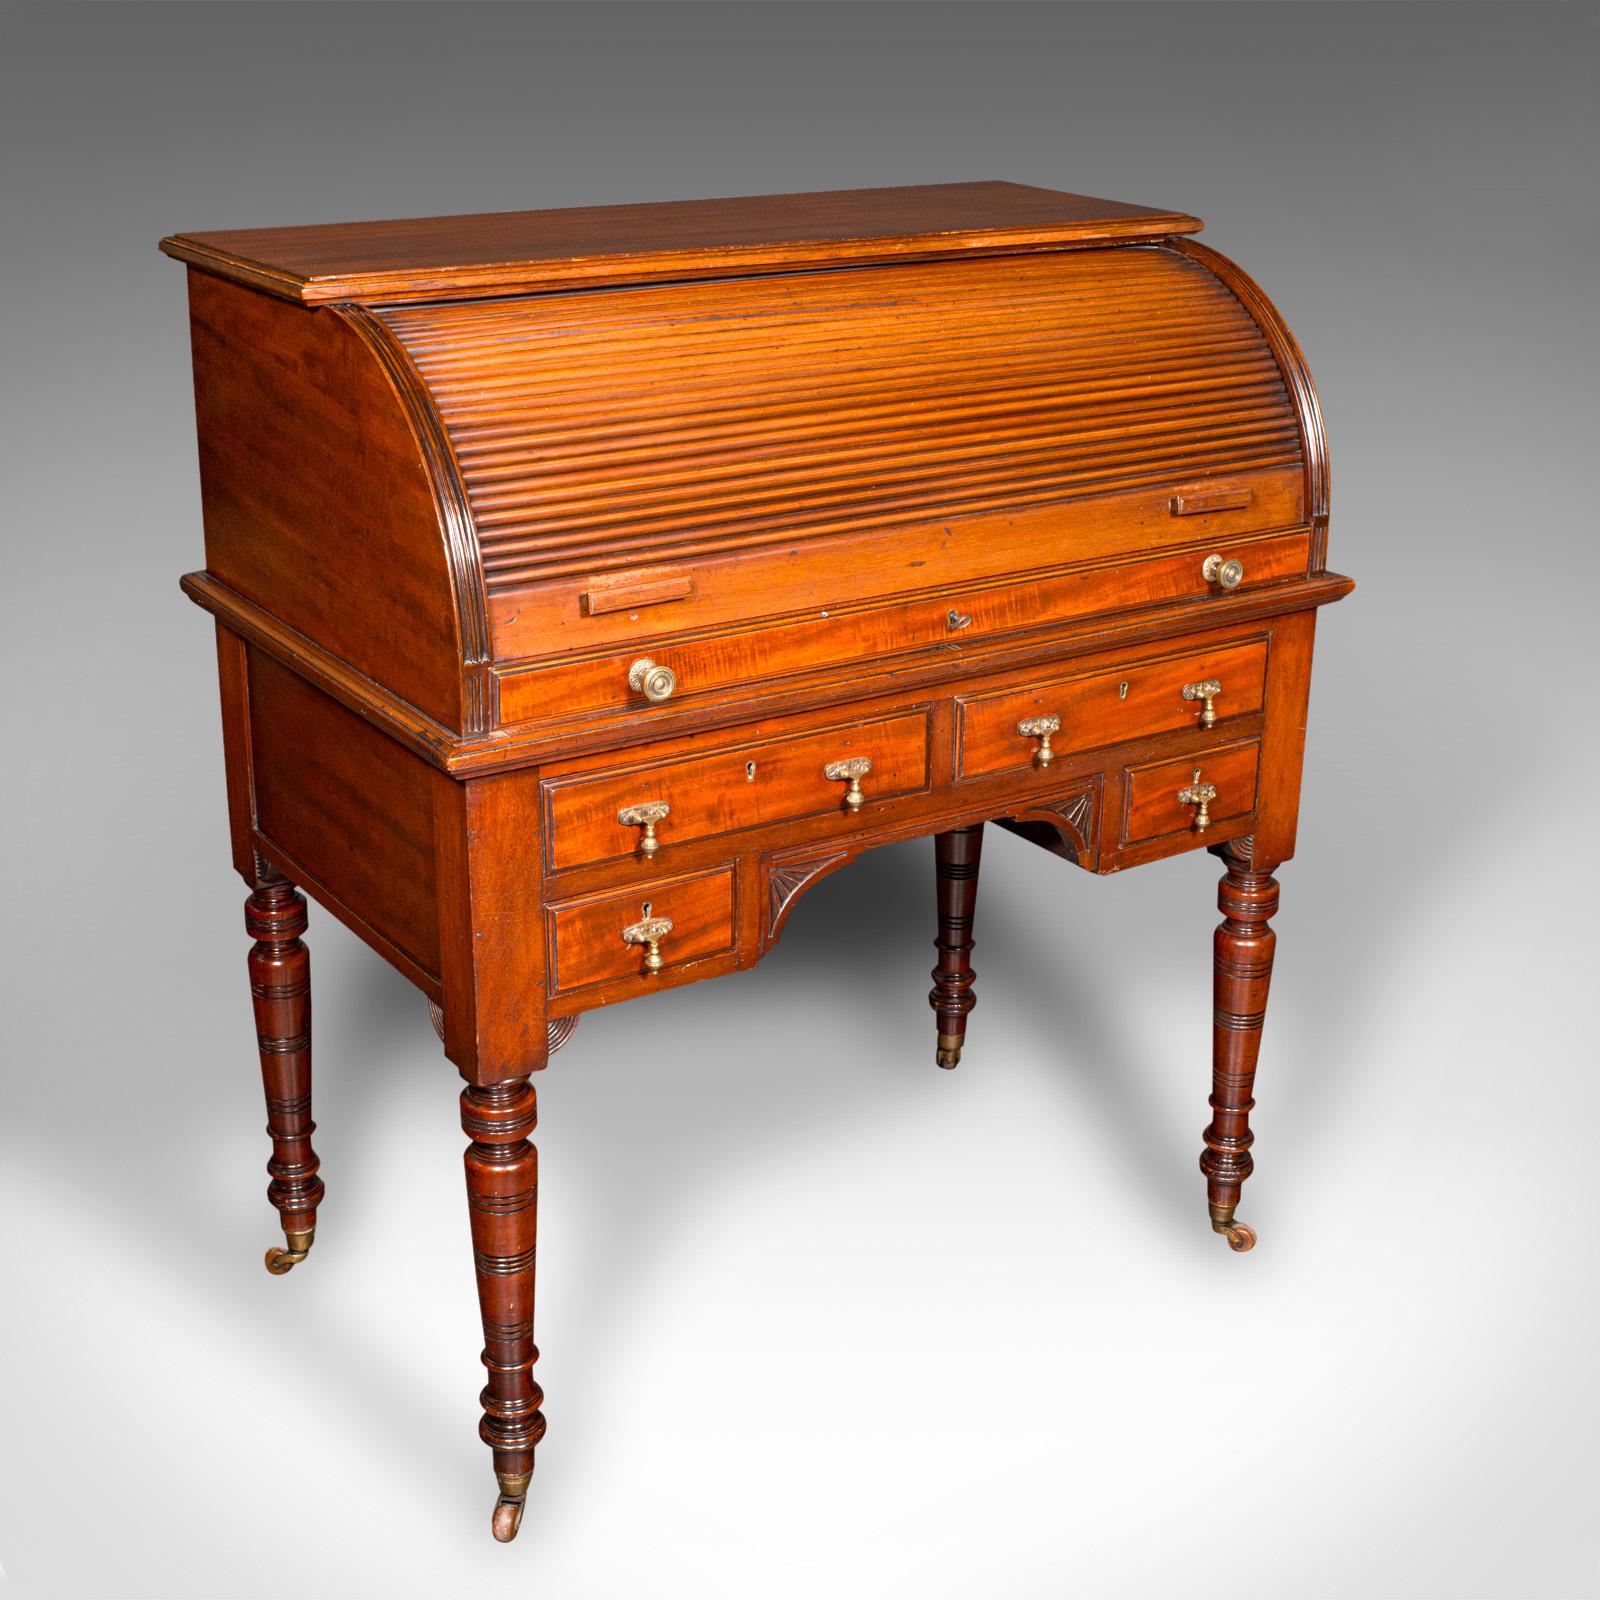 This is an antique roll-top desk. An English, mahogany and leather tambour bureau in Aesthetic Period taste, dating to the late Victorian era, circa 1880.

Beautifully appointed desk, perfect for the drawing room
Displays a desirable aged patina and